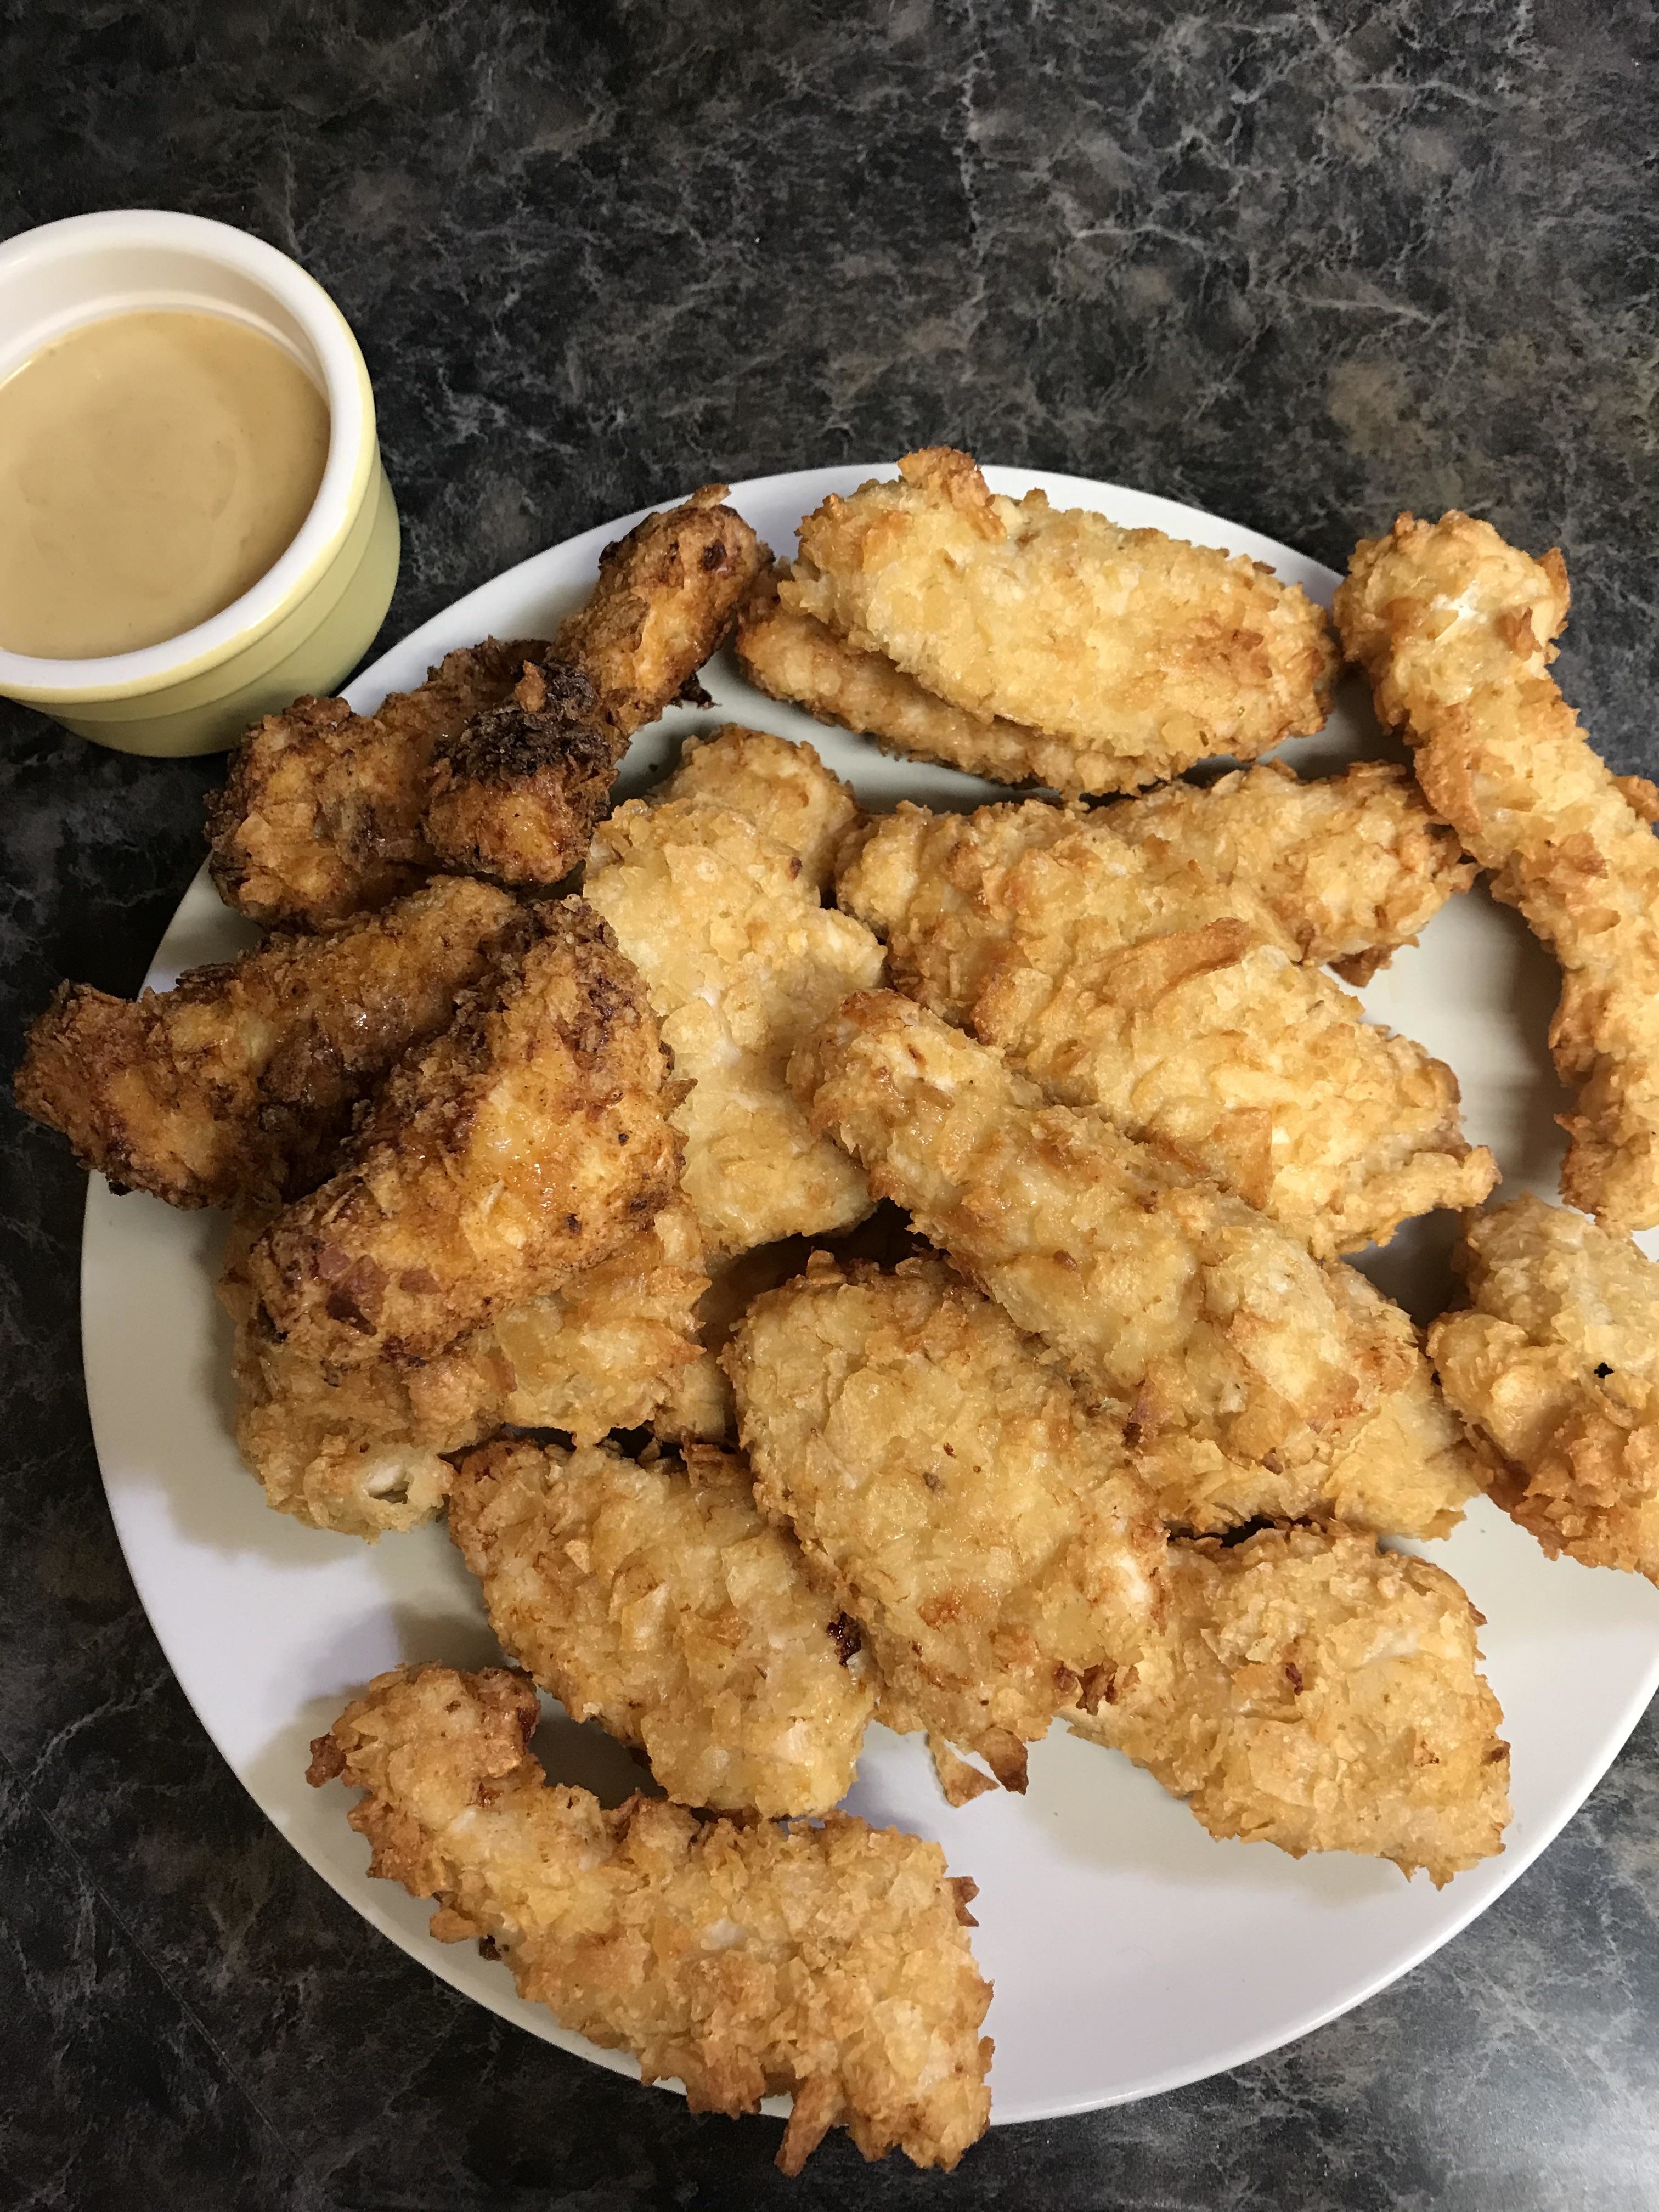 Plate of breaded chicken tenders with a side of dipping sauce